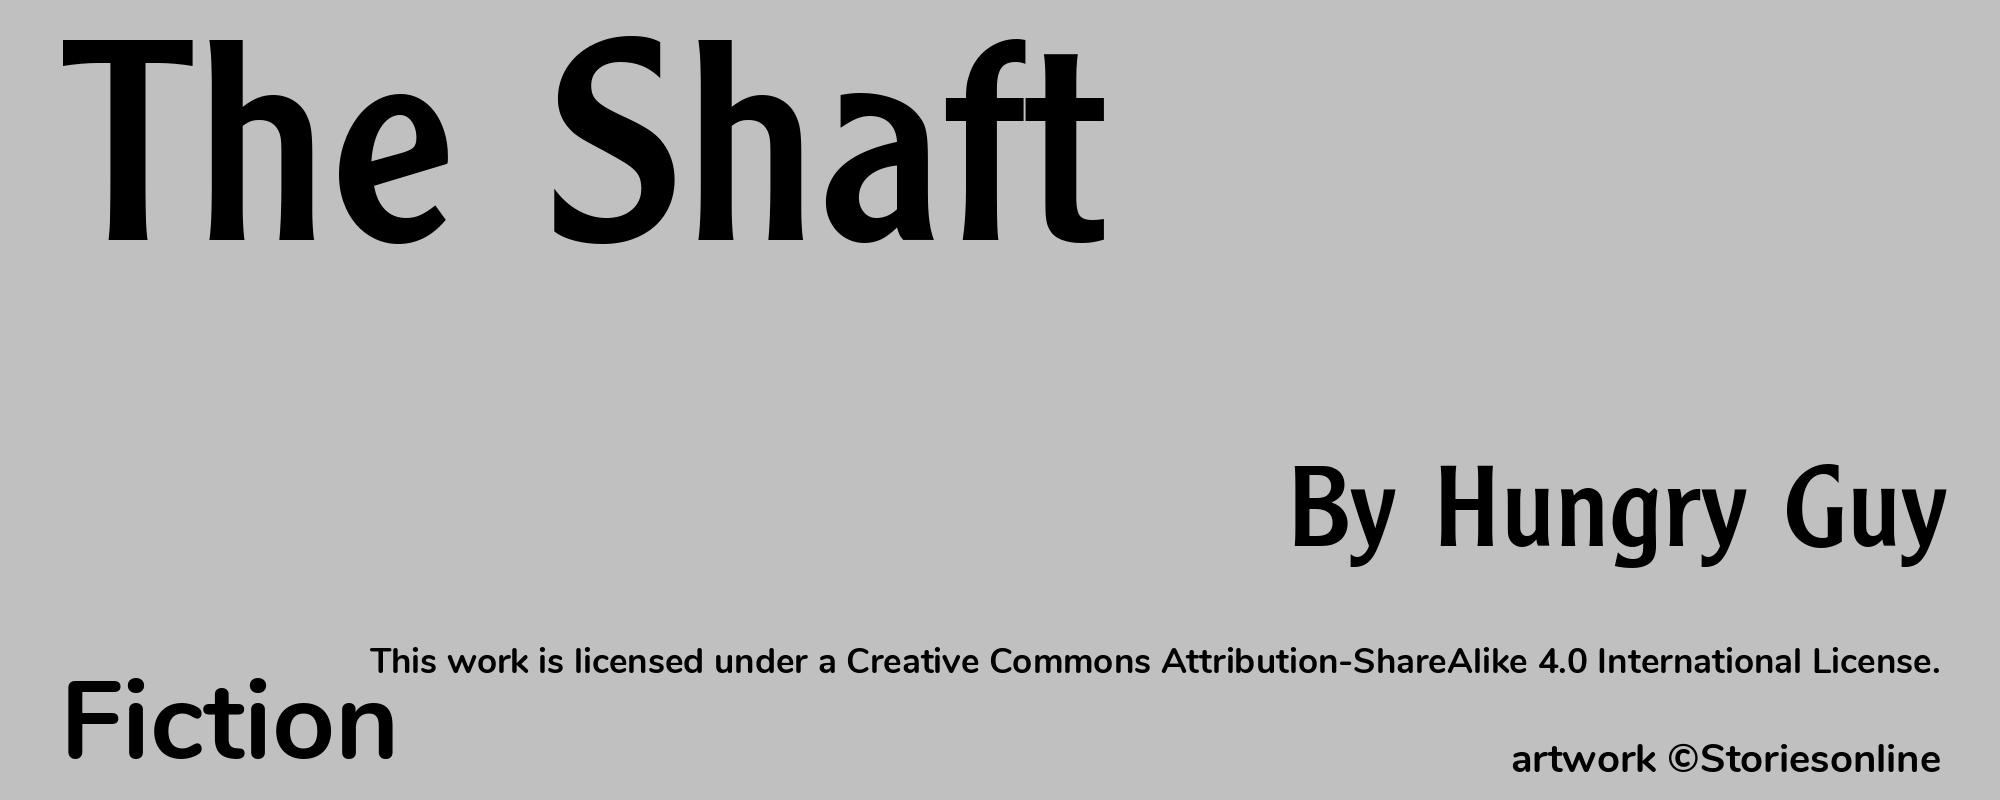 The Shaft - Cover